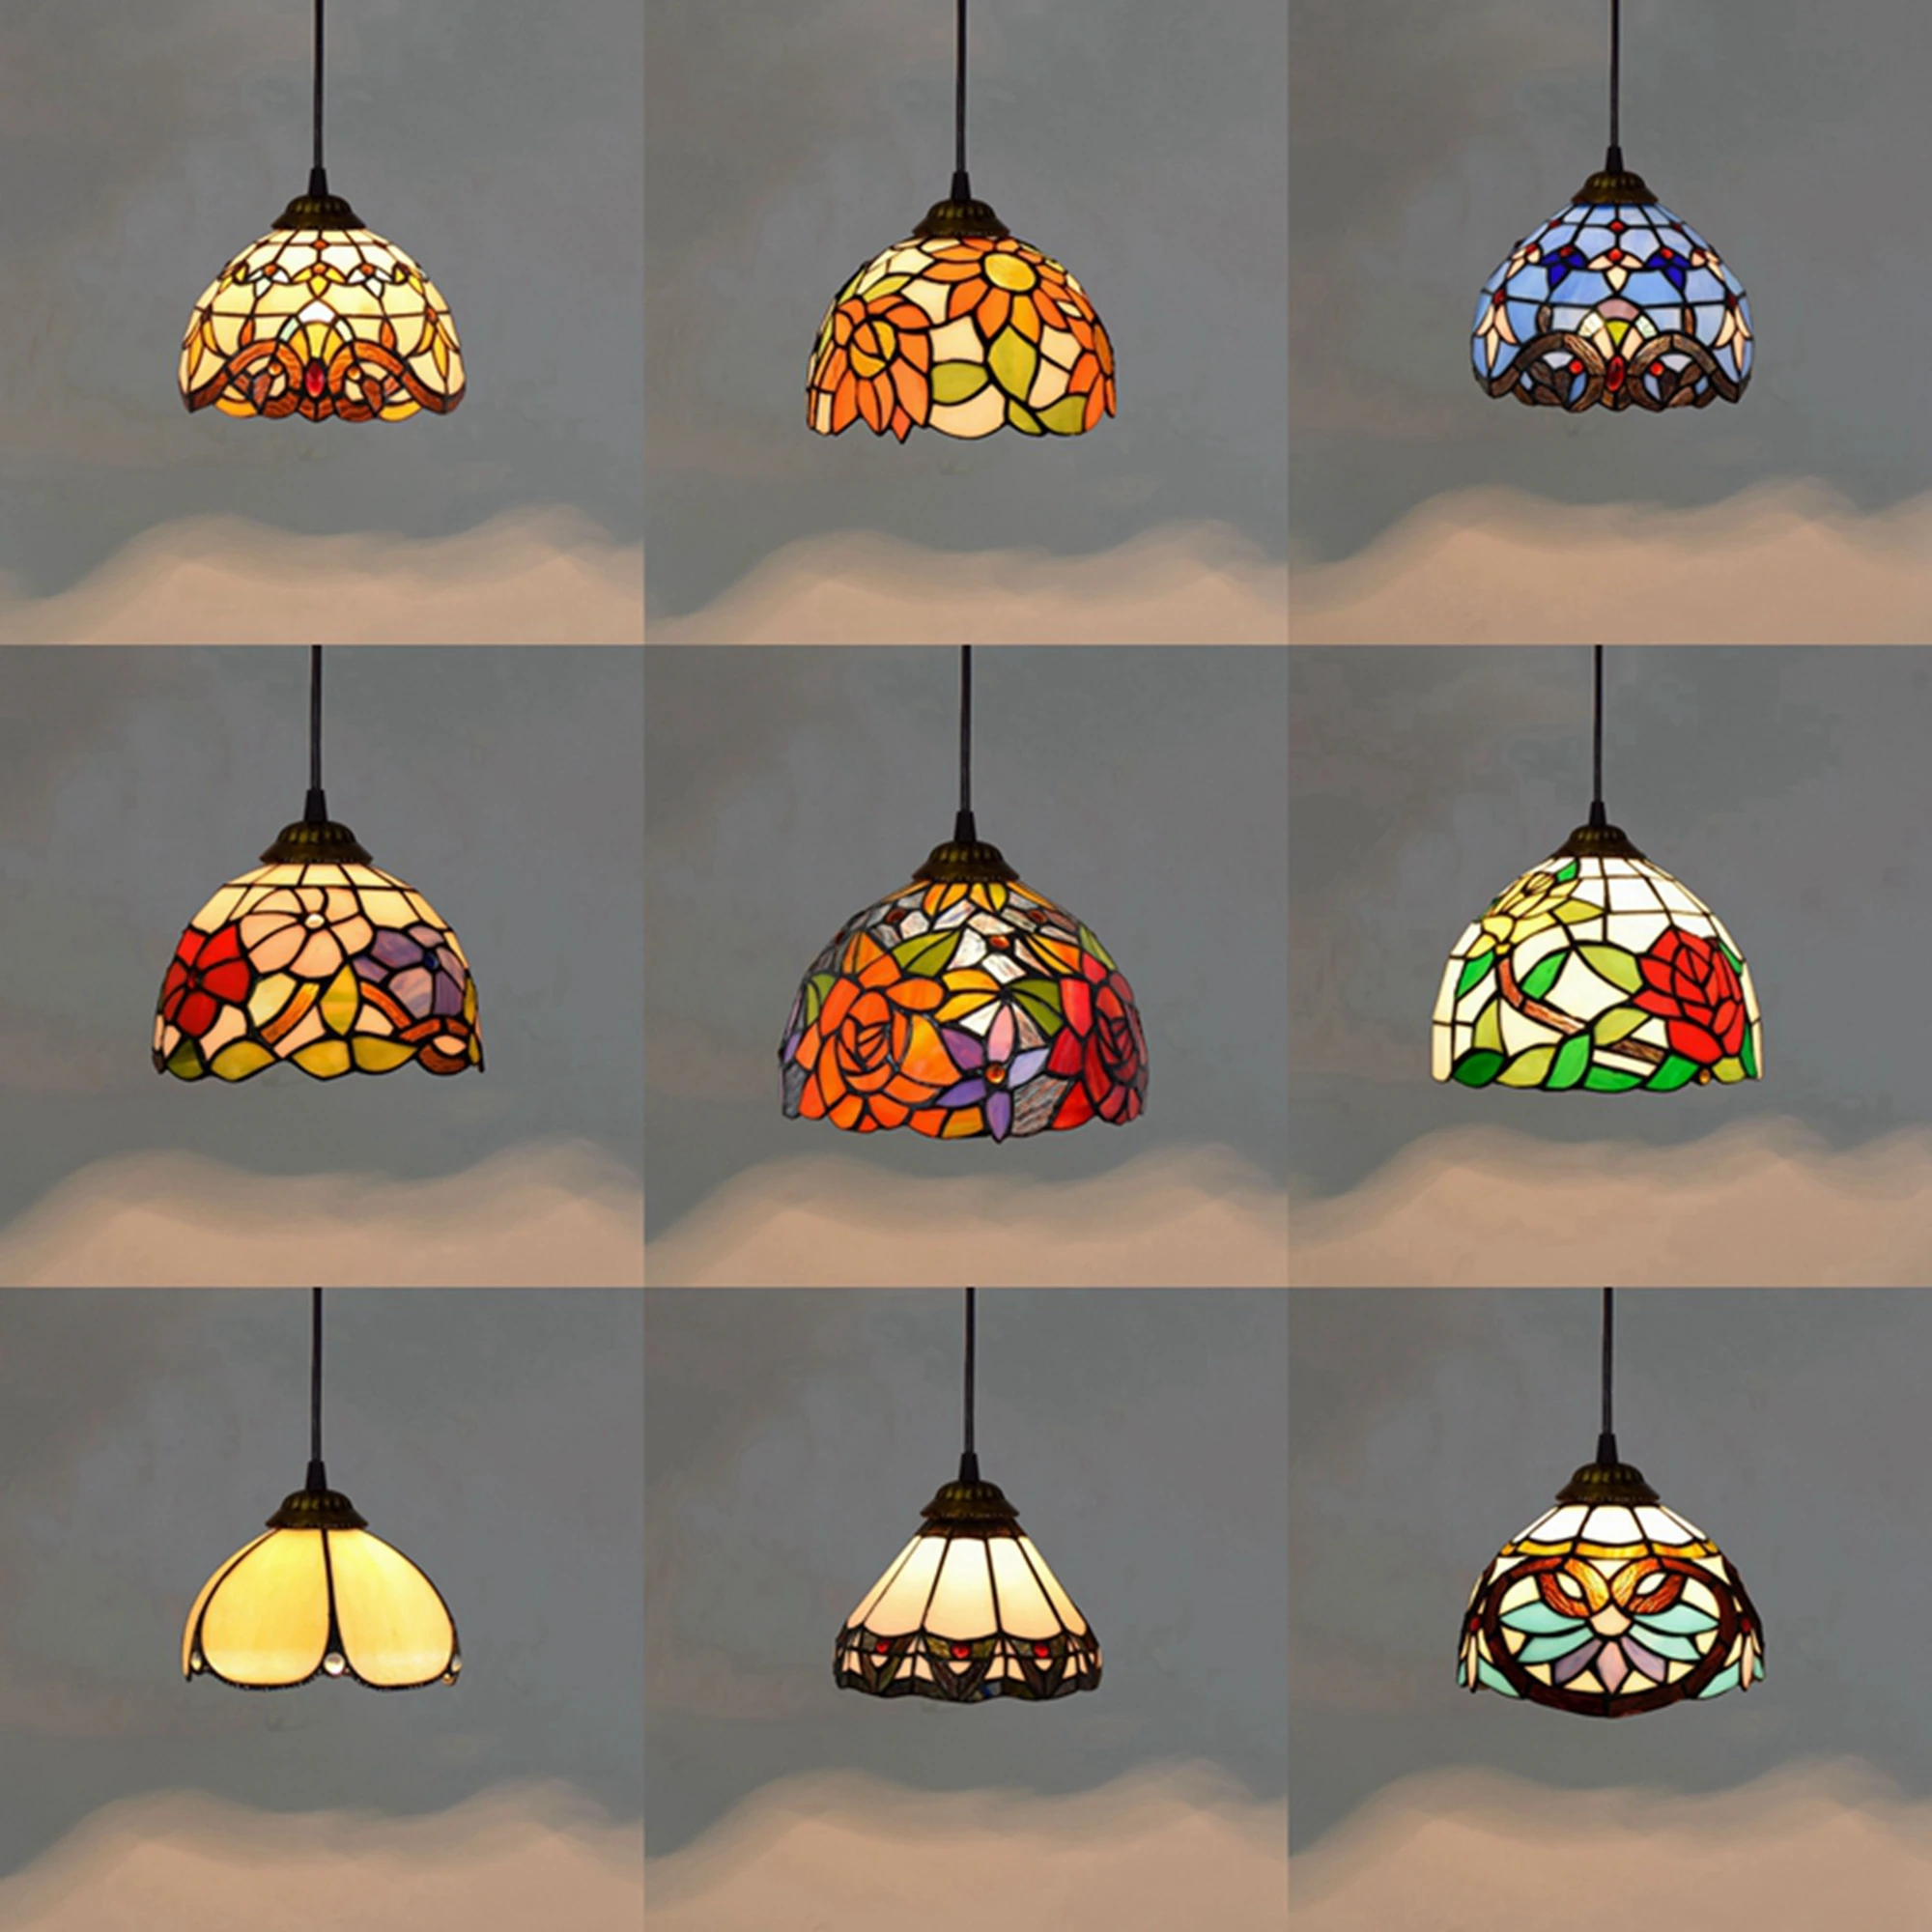 

8 inch Tiffany colored glass lamp, bedside pendant lamp, hotel restaurant bar, table lamp, balcony, hallway, and foyer lamp